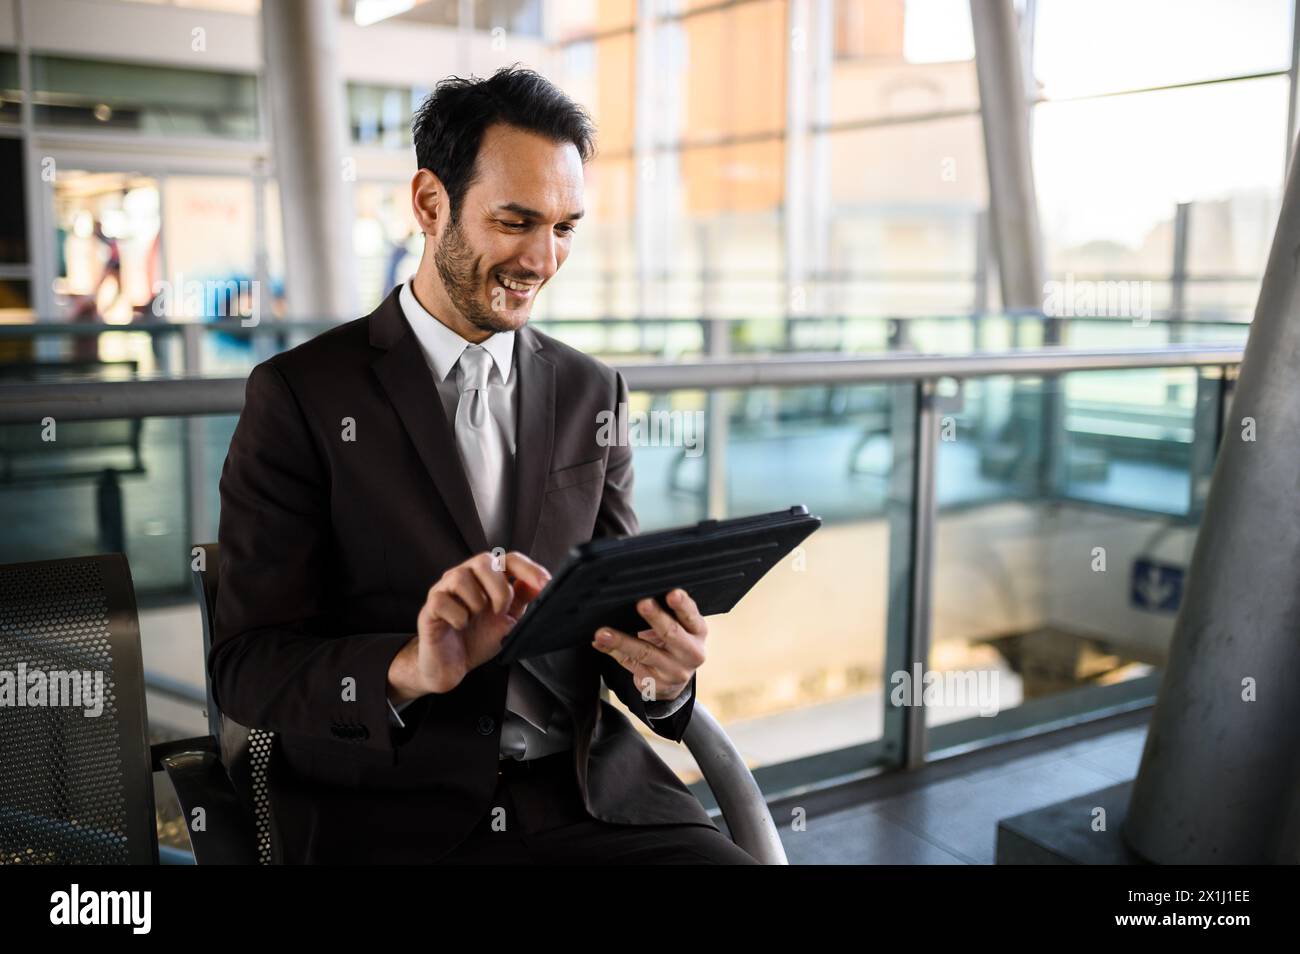 Dapper businessman engages with digital tablet while waiting for his flight at an airport terminal Stock Photo